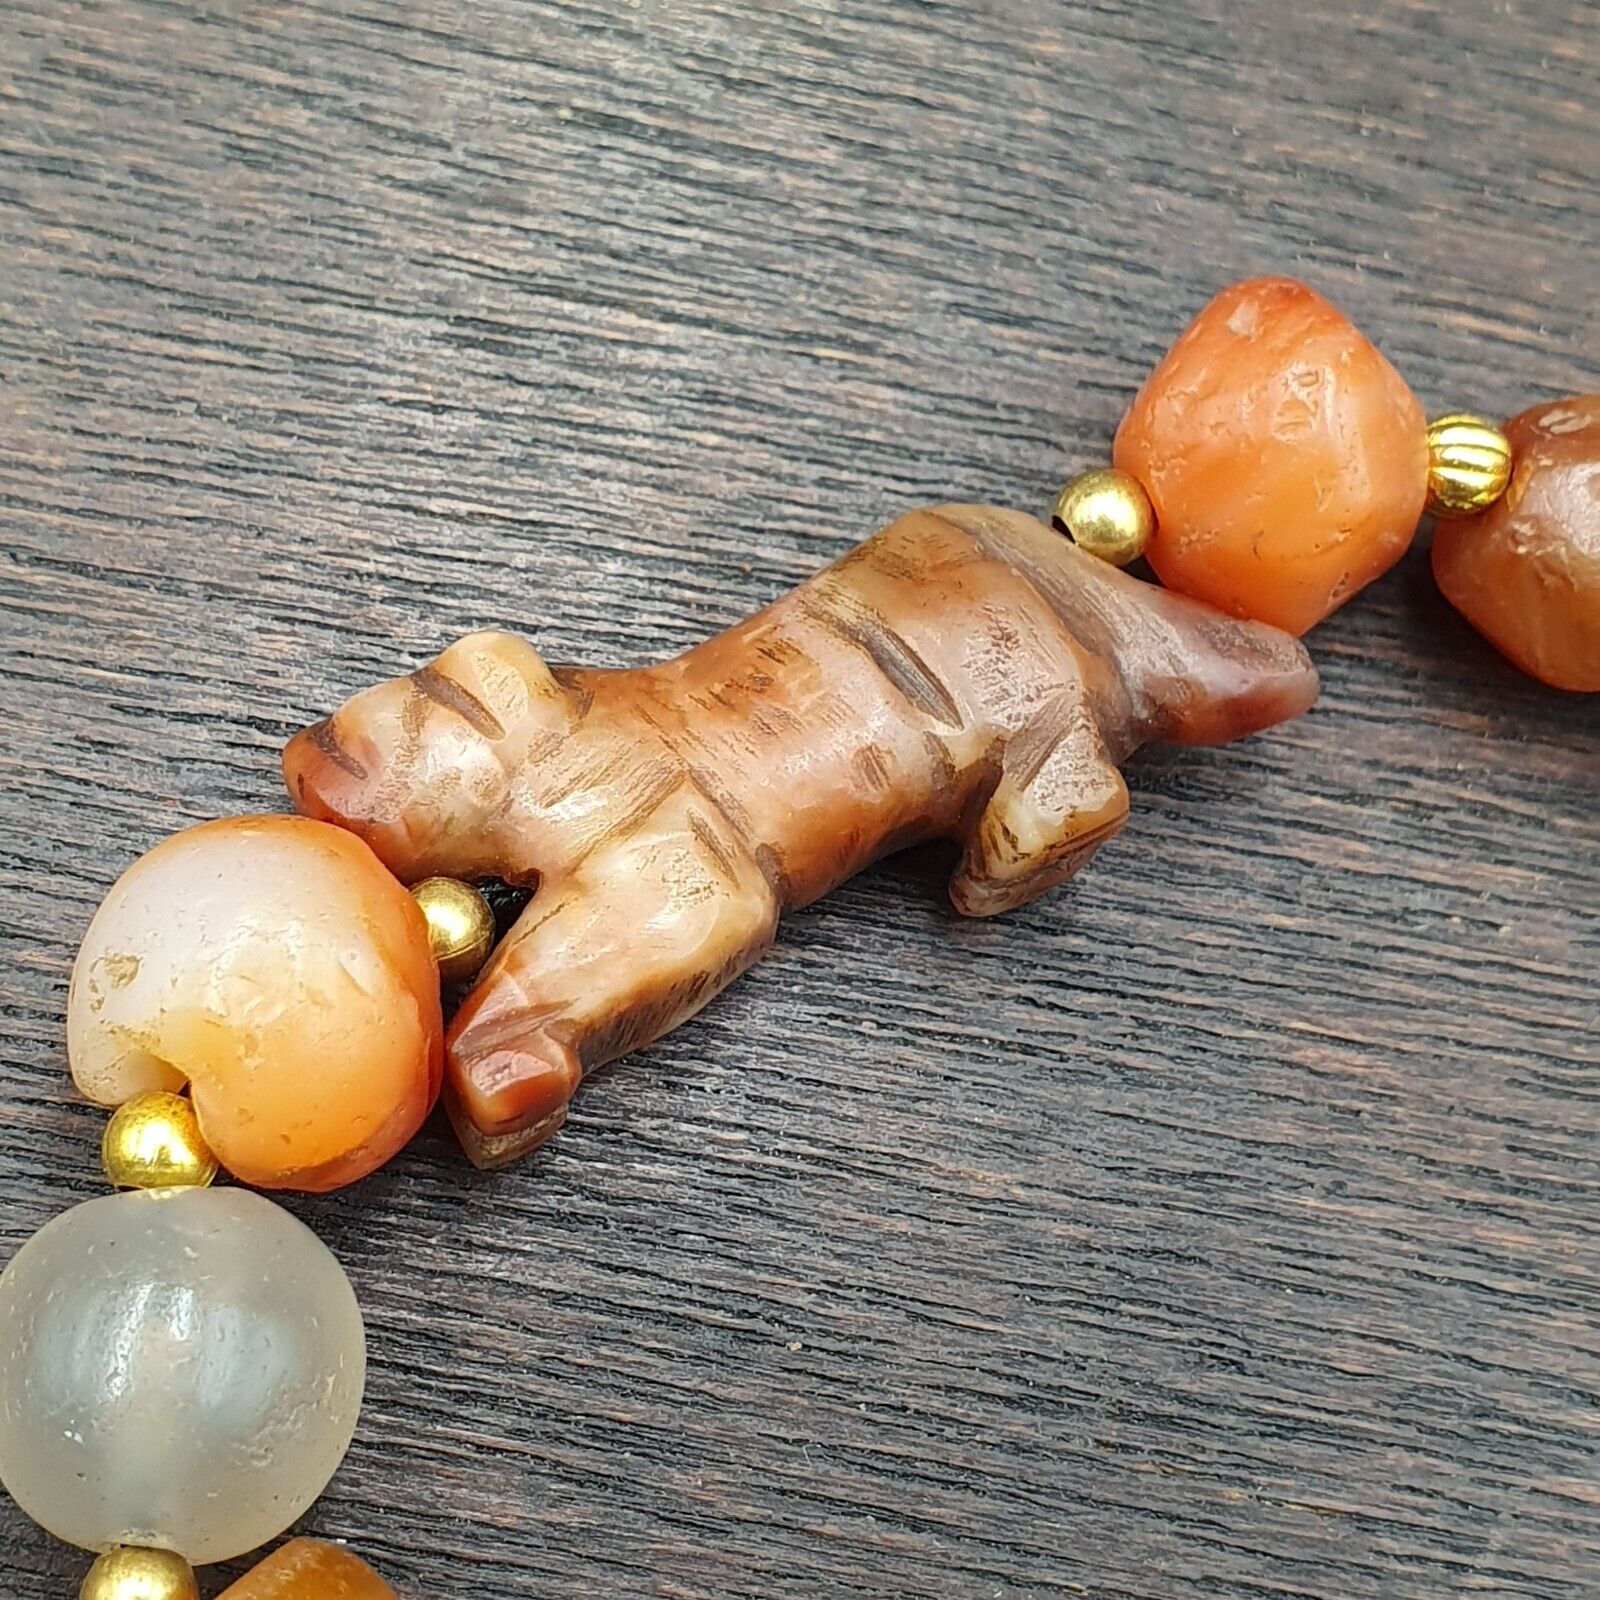 Antique Ancient Agate Animal Figurine with carnelian Agate Beads Bracelet